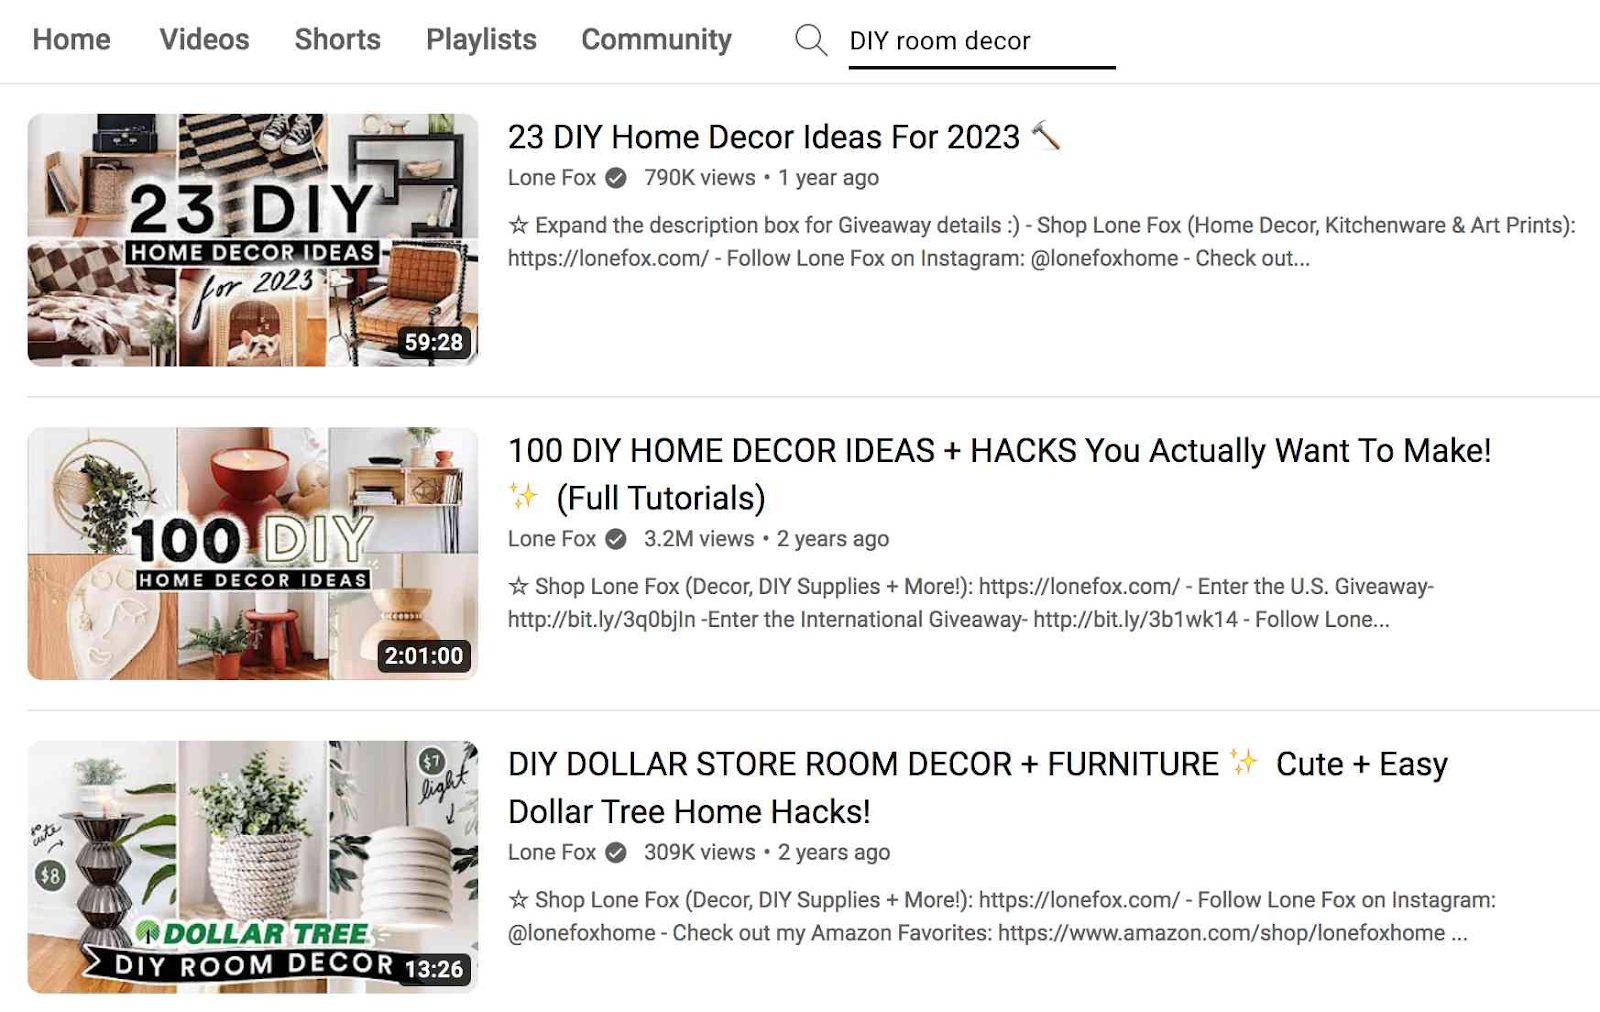 Lone Fox's YouTube videos for "DIY room decor" search